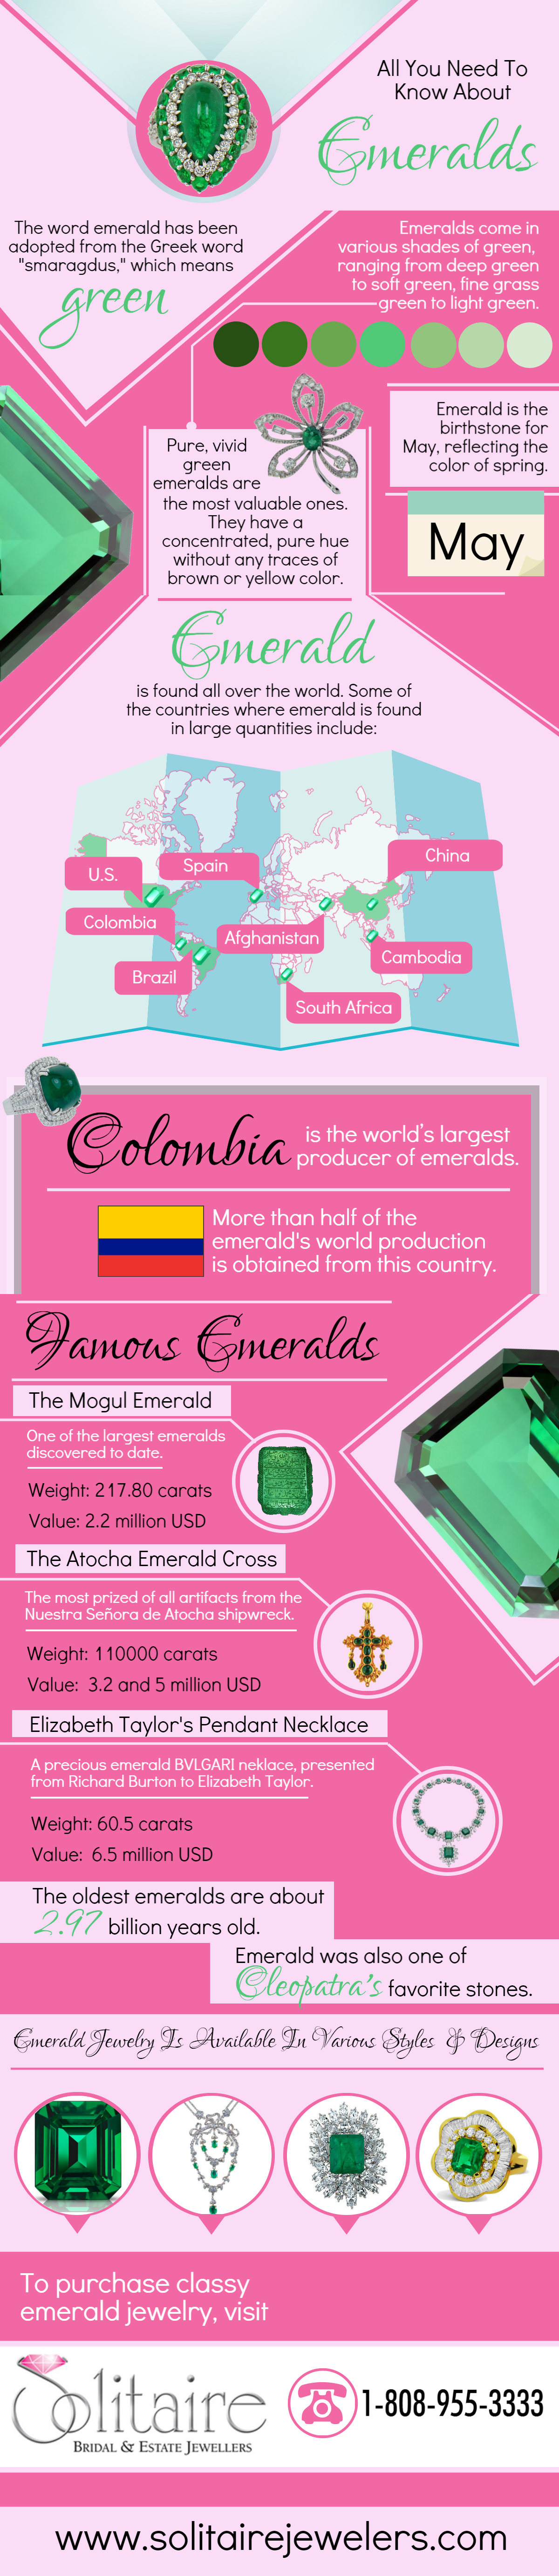 All You Need To Know About Emeralds